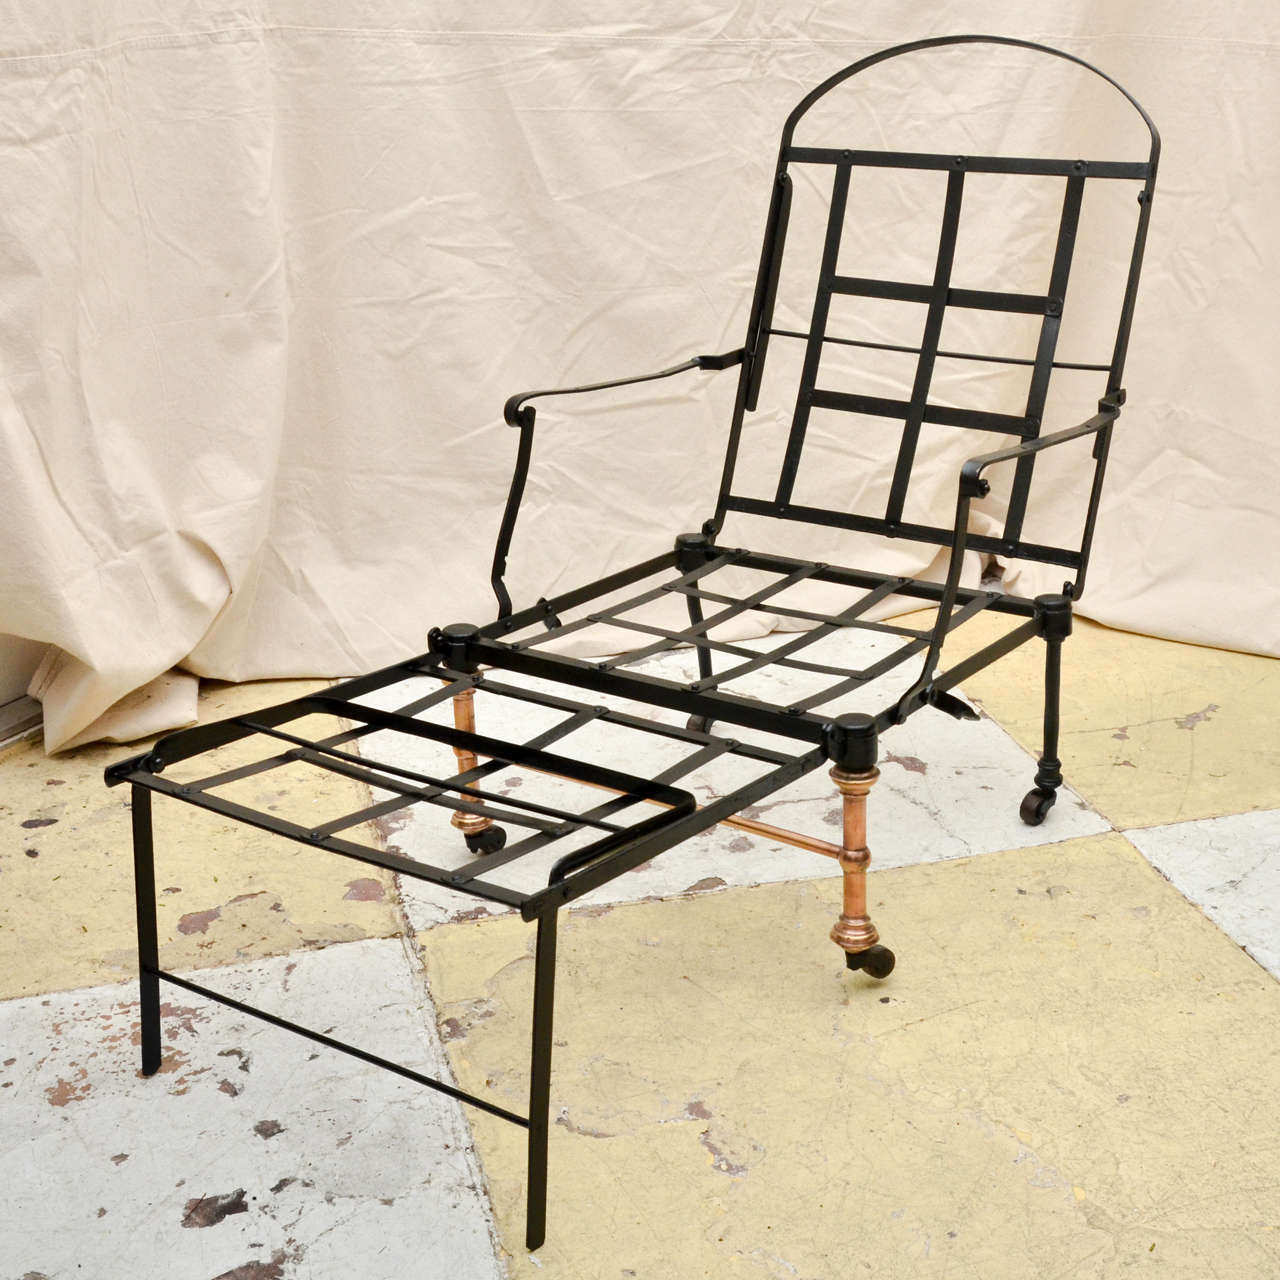 19th century English black painted steel and cast iron Campaign chaise longue with brass front legs. The chaise longue folds to a chair and extends to camp bed. It folds for easy transport. Military officers used it as a multipurpose piece of